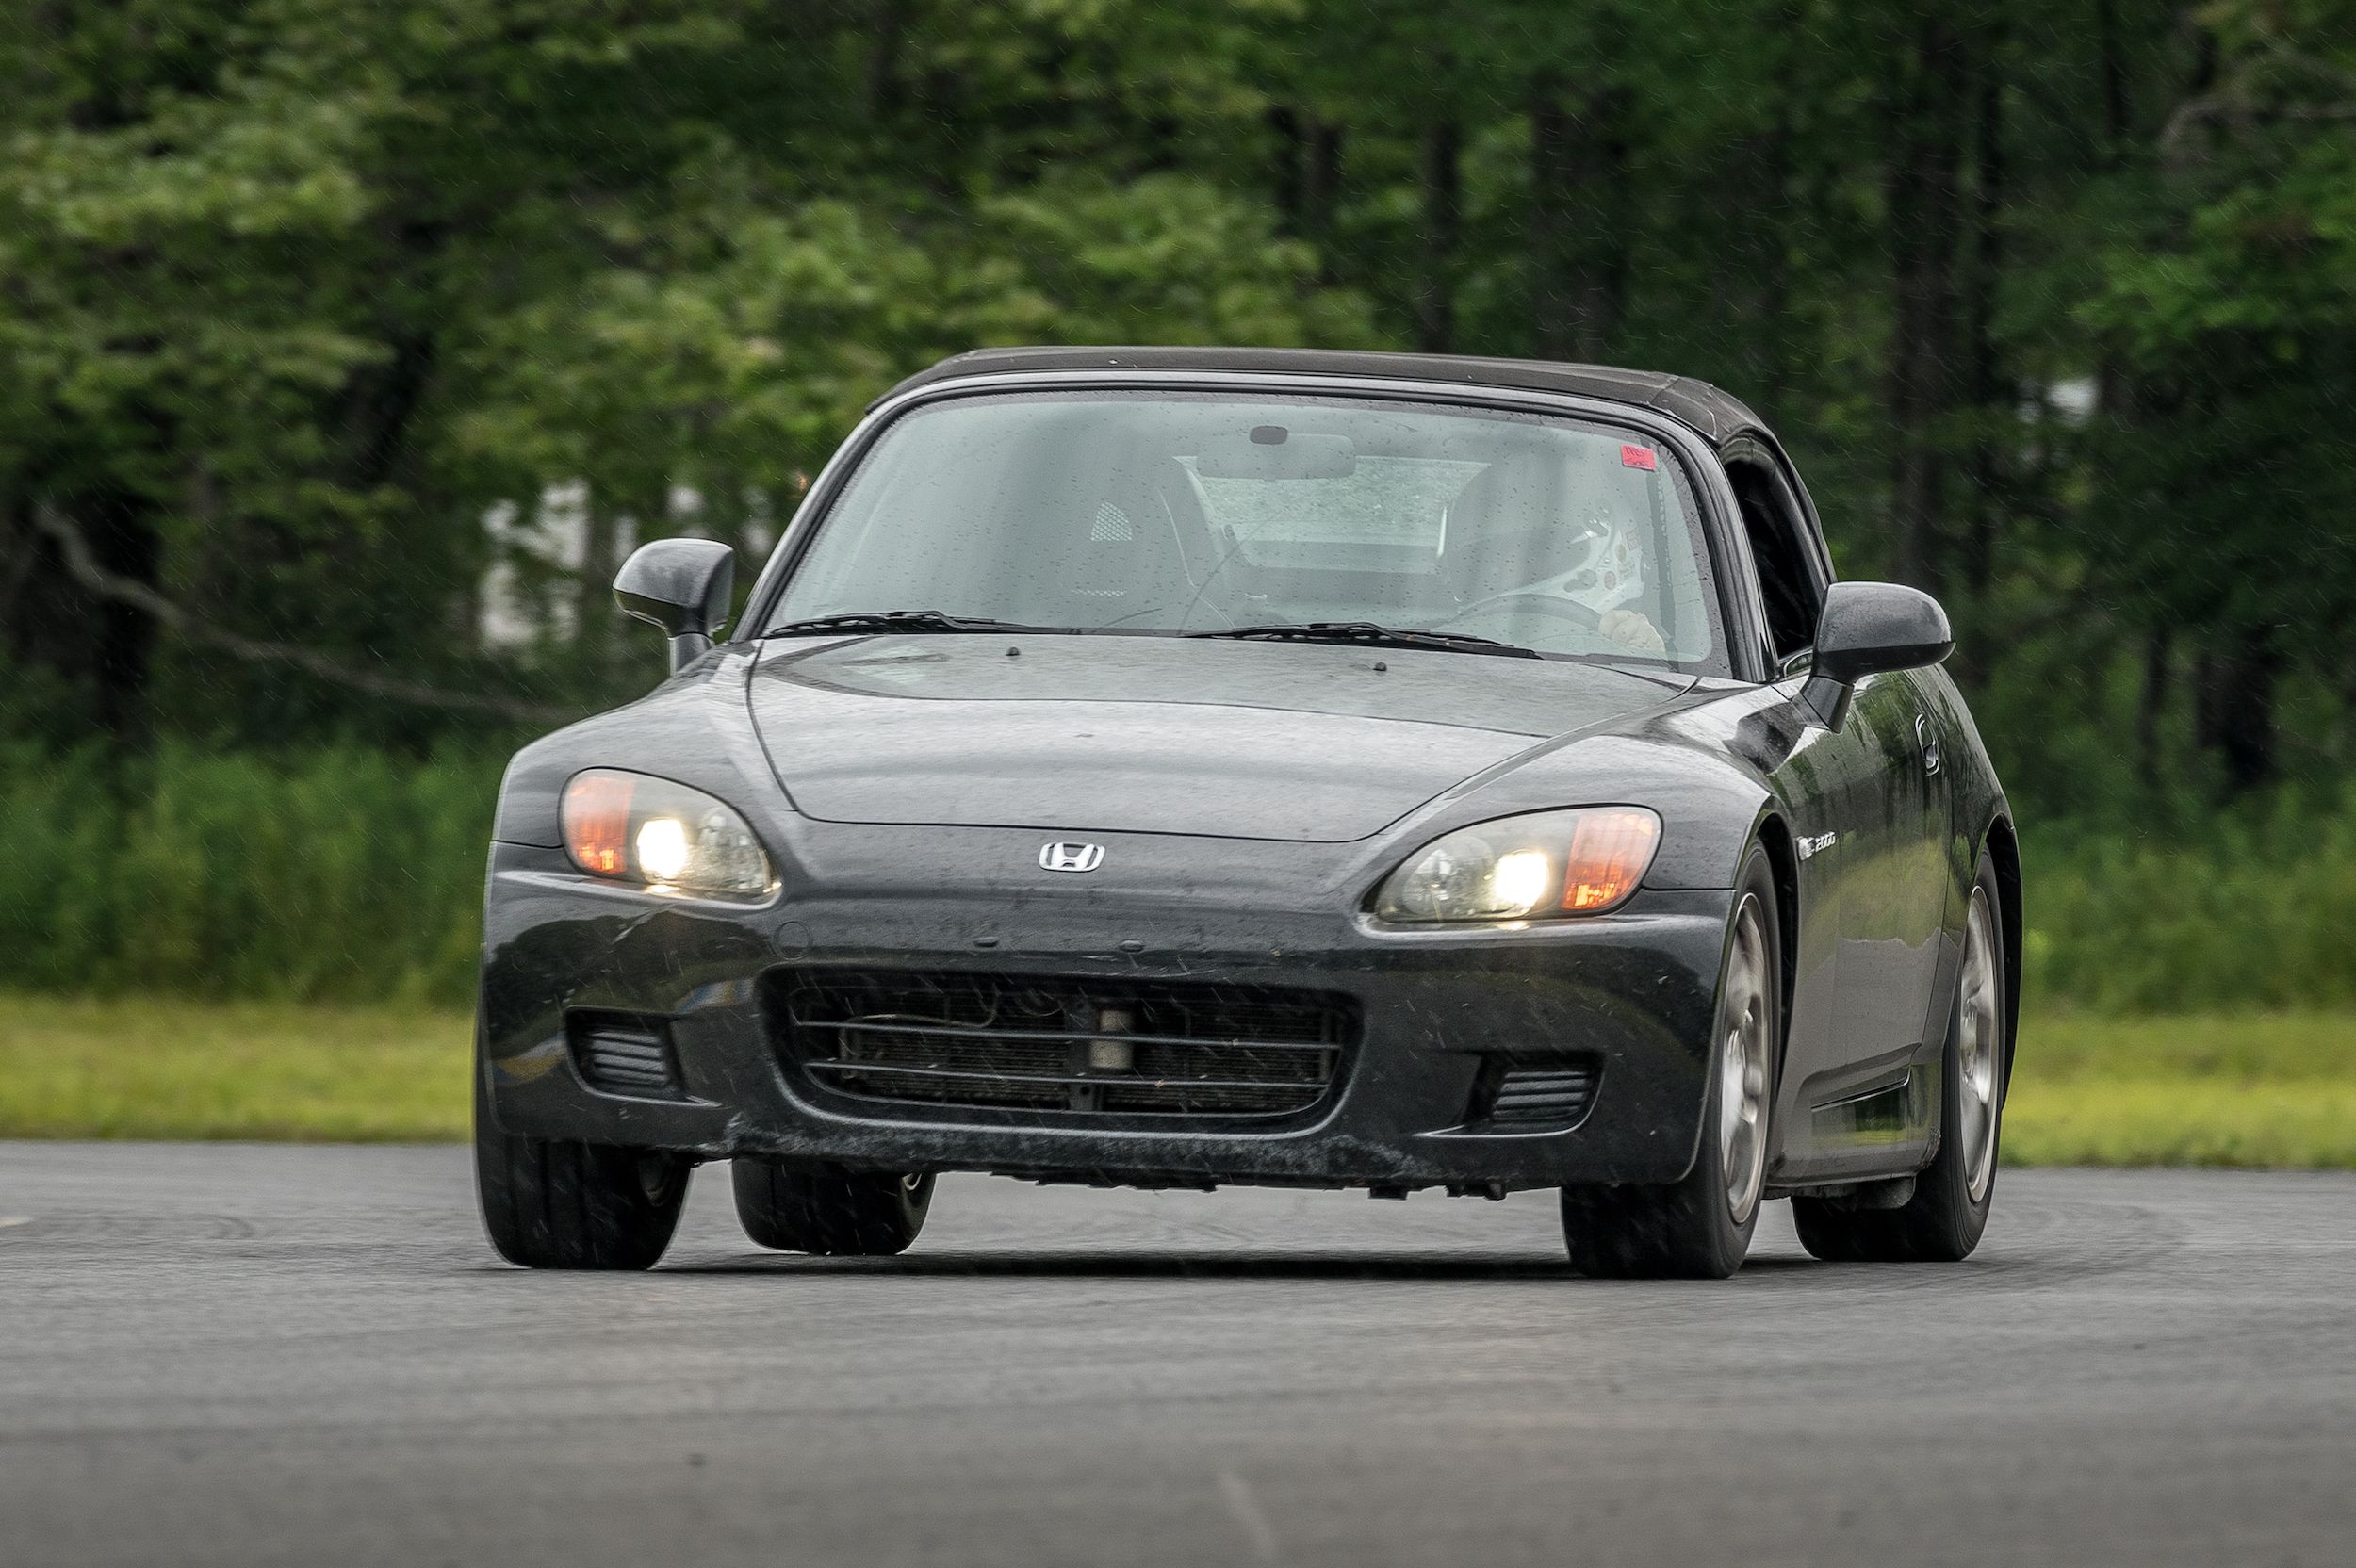 Even at 300,000 Miles, My Honda S2000 Is a Serious Track Weapon